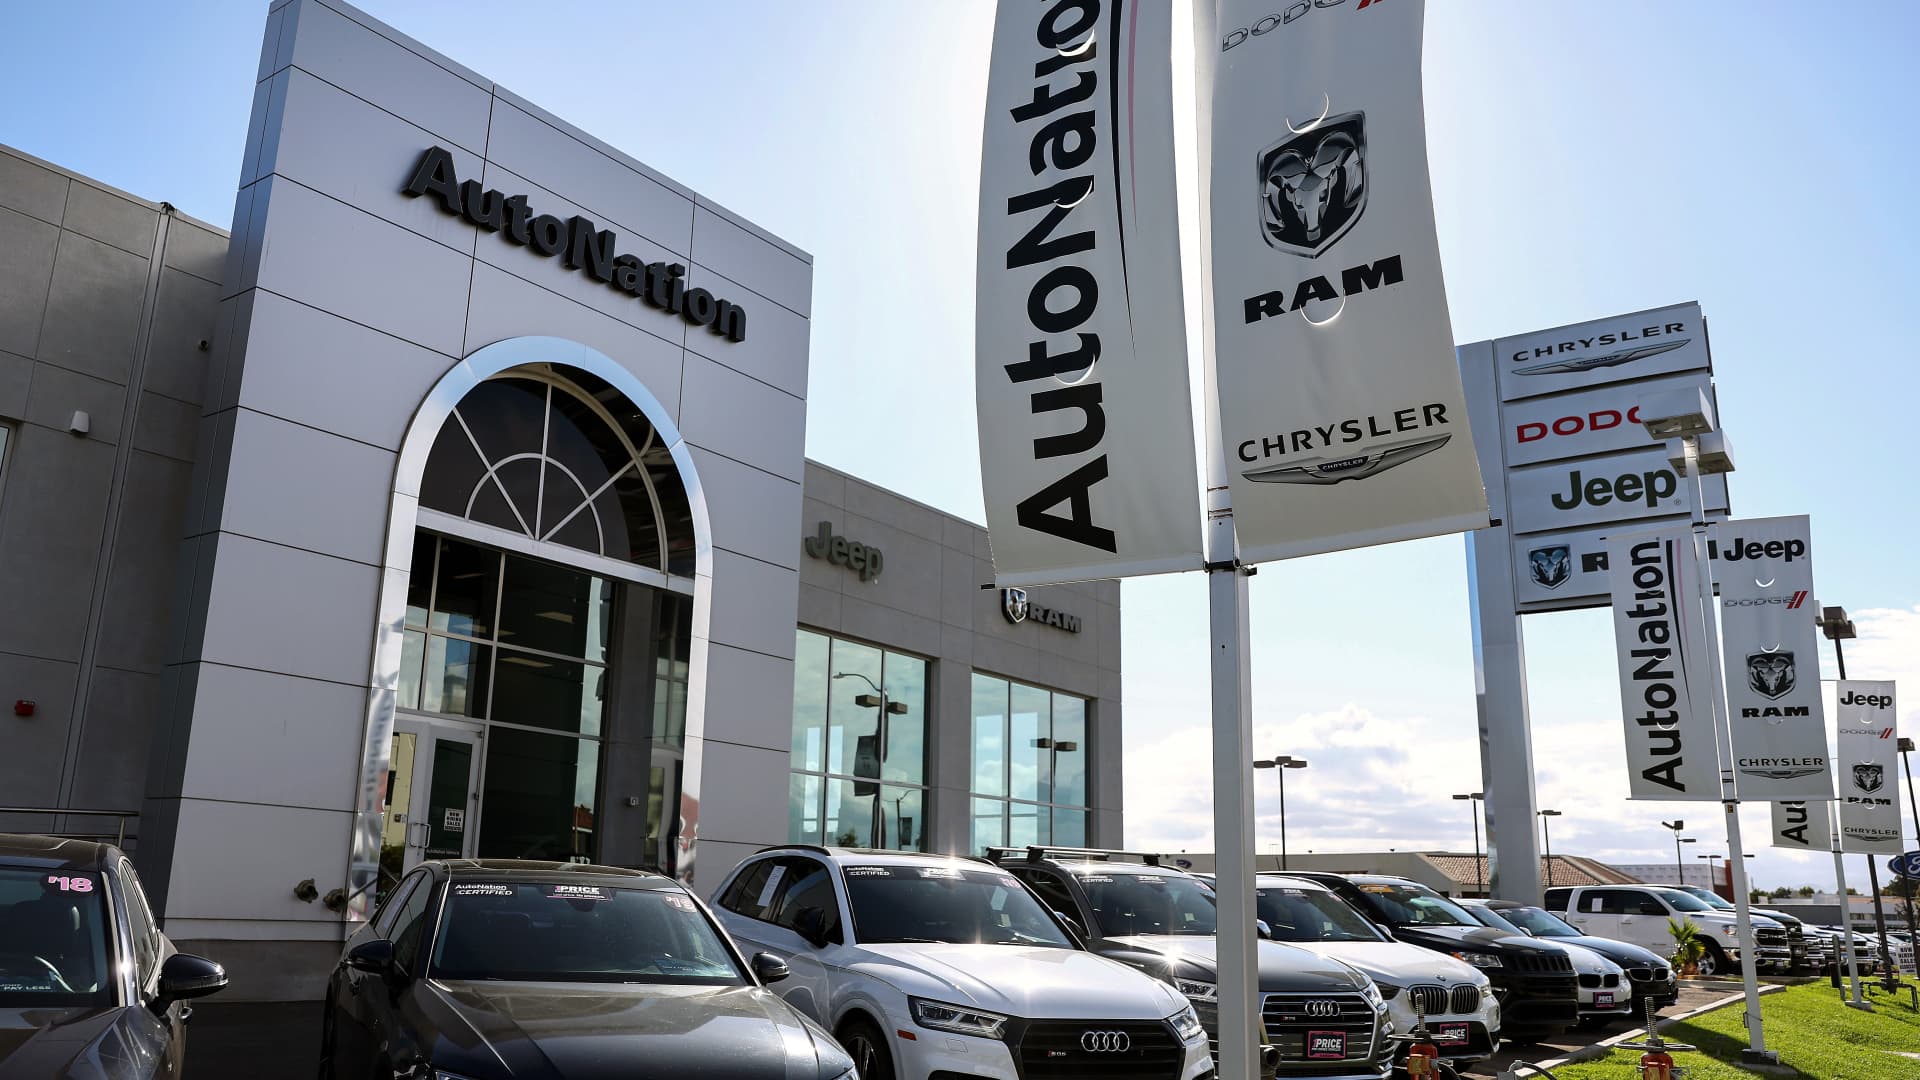 Vehicles are displayed for sale at an AutoNation car dealership on April 21, 2022 in Valencia, California.